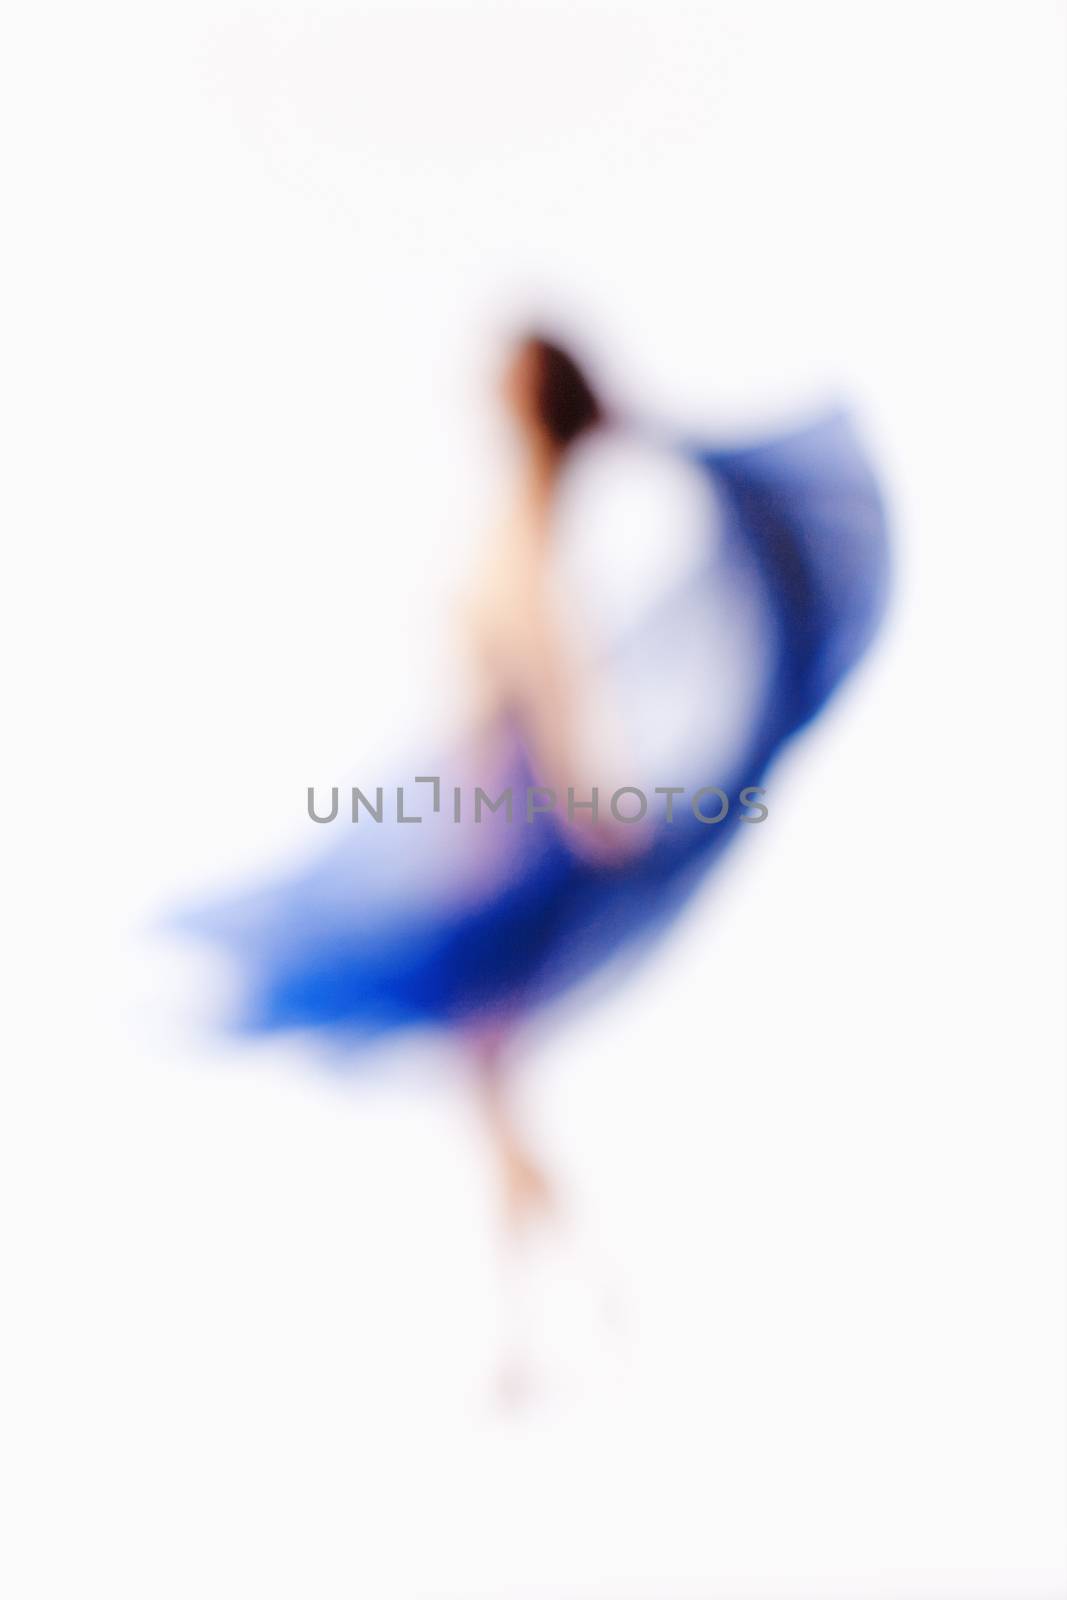 Out of Focus Image of a Woman with Blue Cloth by courtyardpix